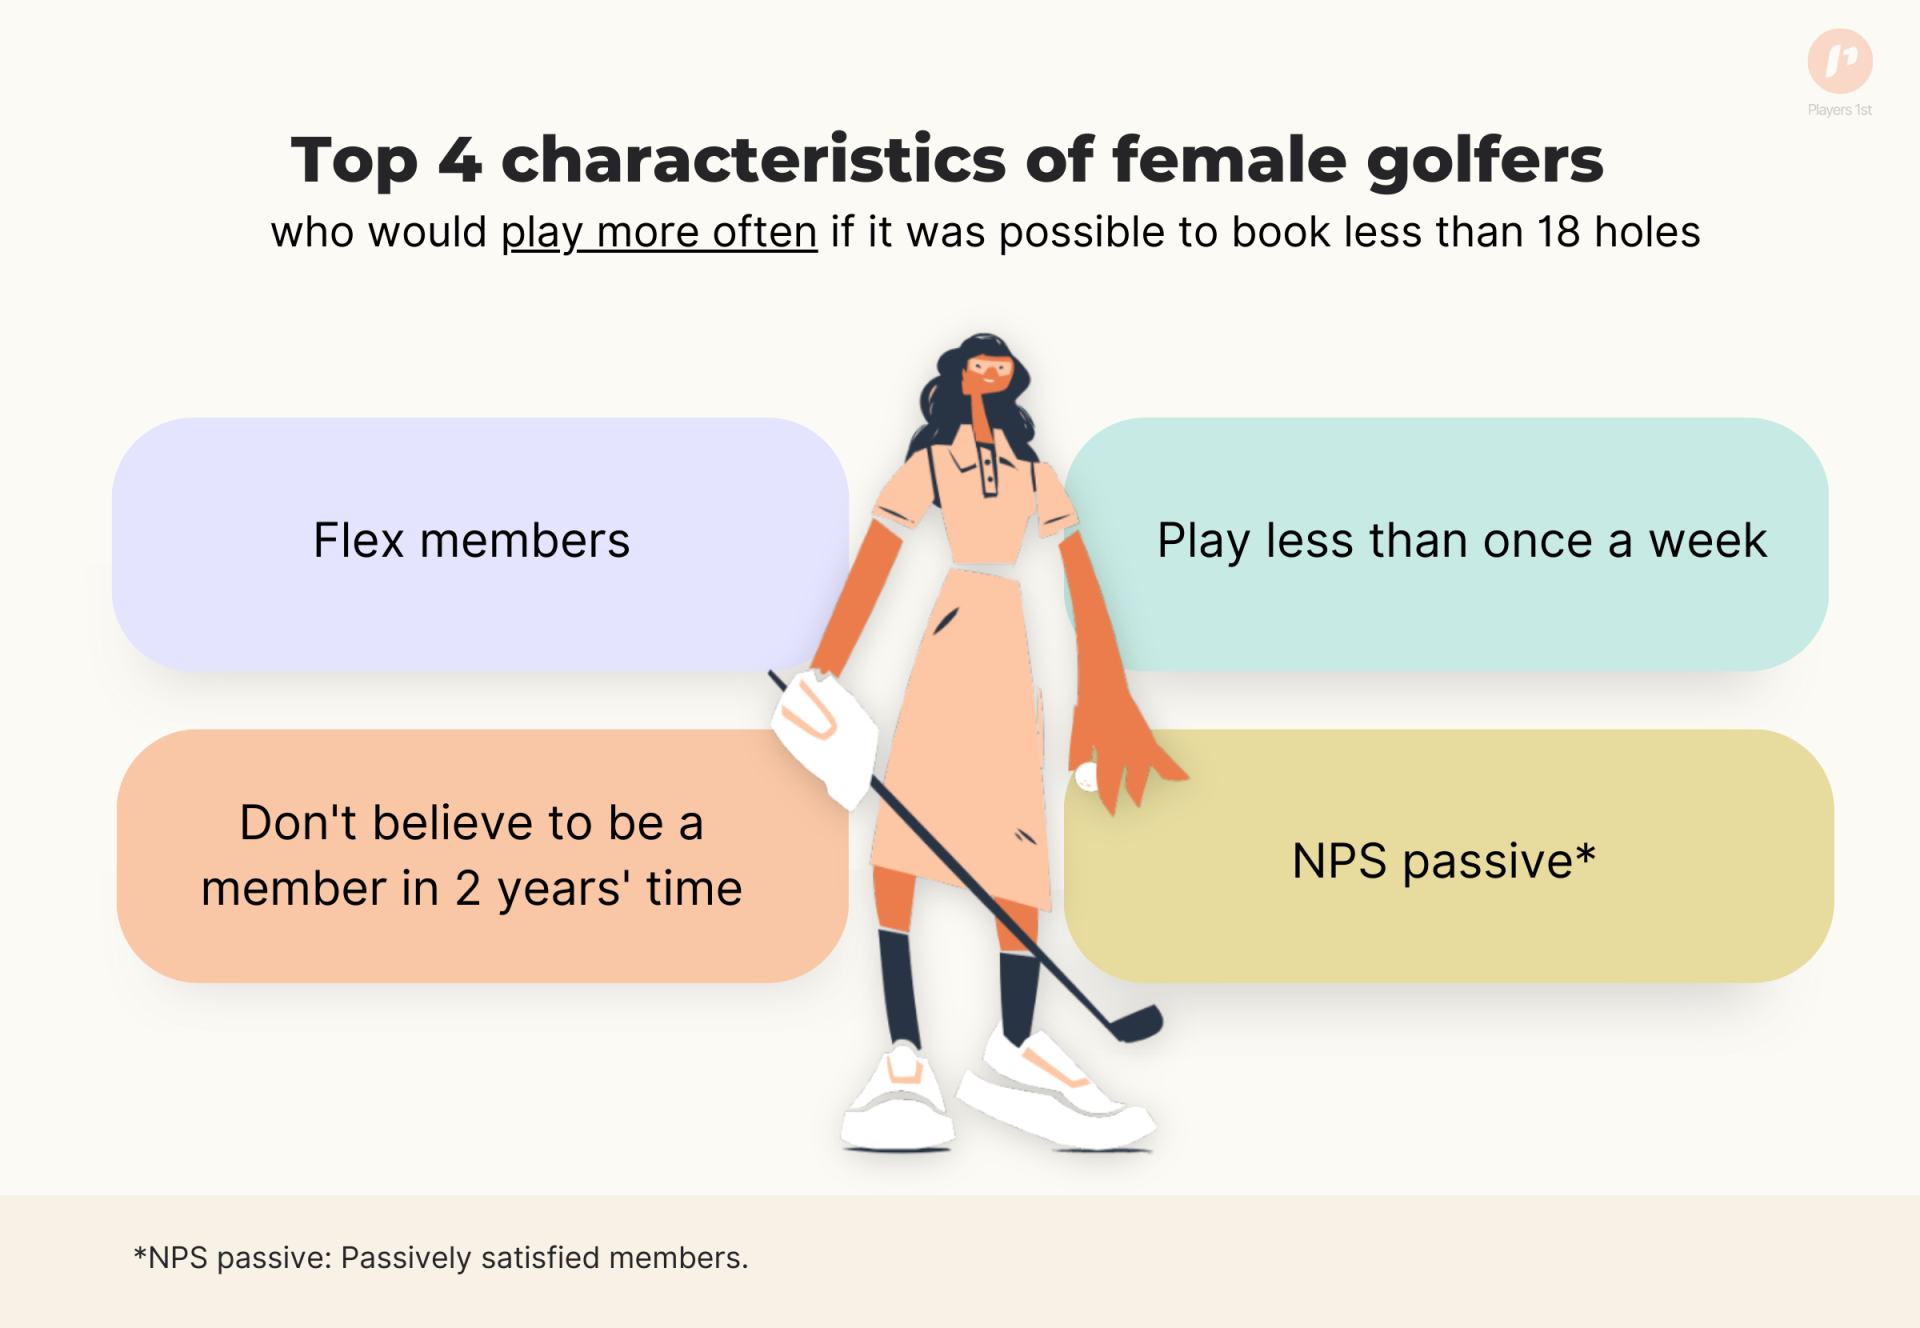 Top 4 characteristics of female golfers who would play more often if it was possible to book less than 18 holes.